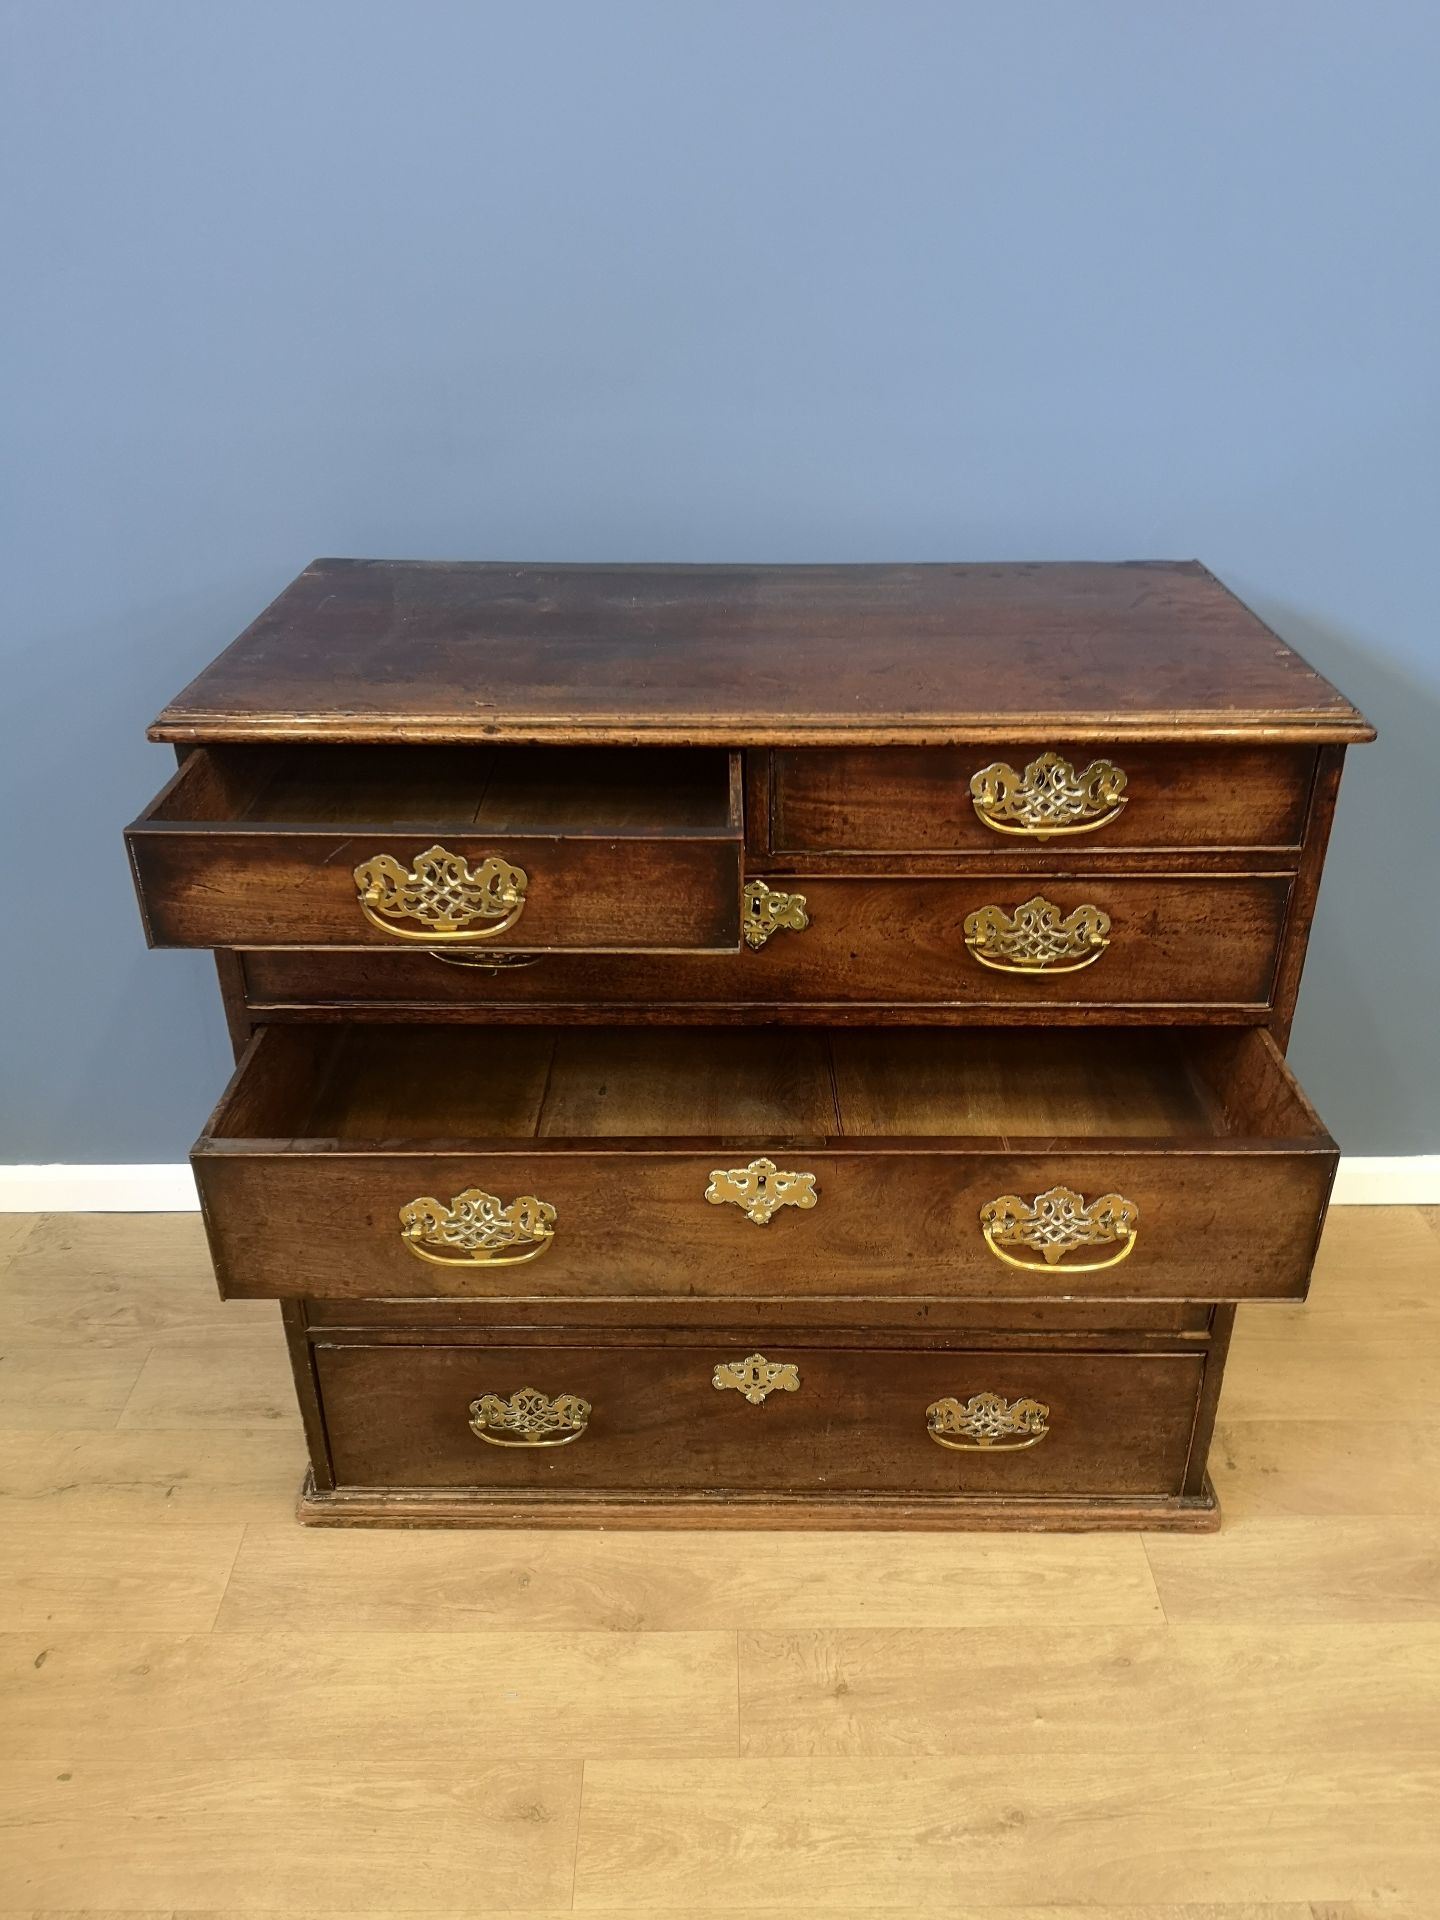 Mahogany chest of drawers - Image 2 of 4